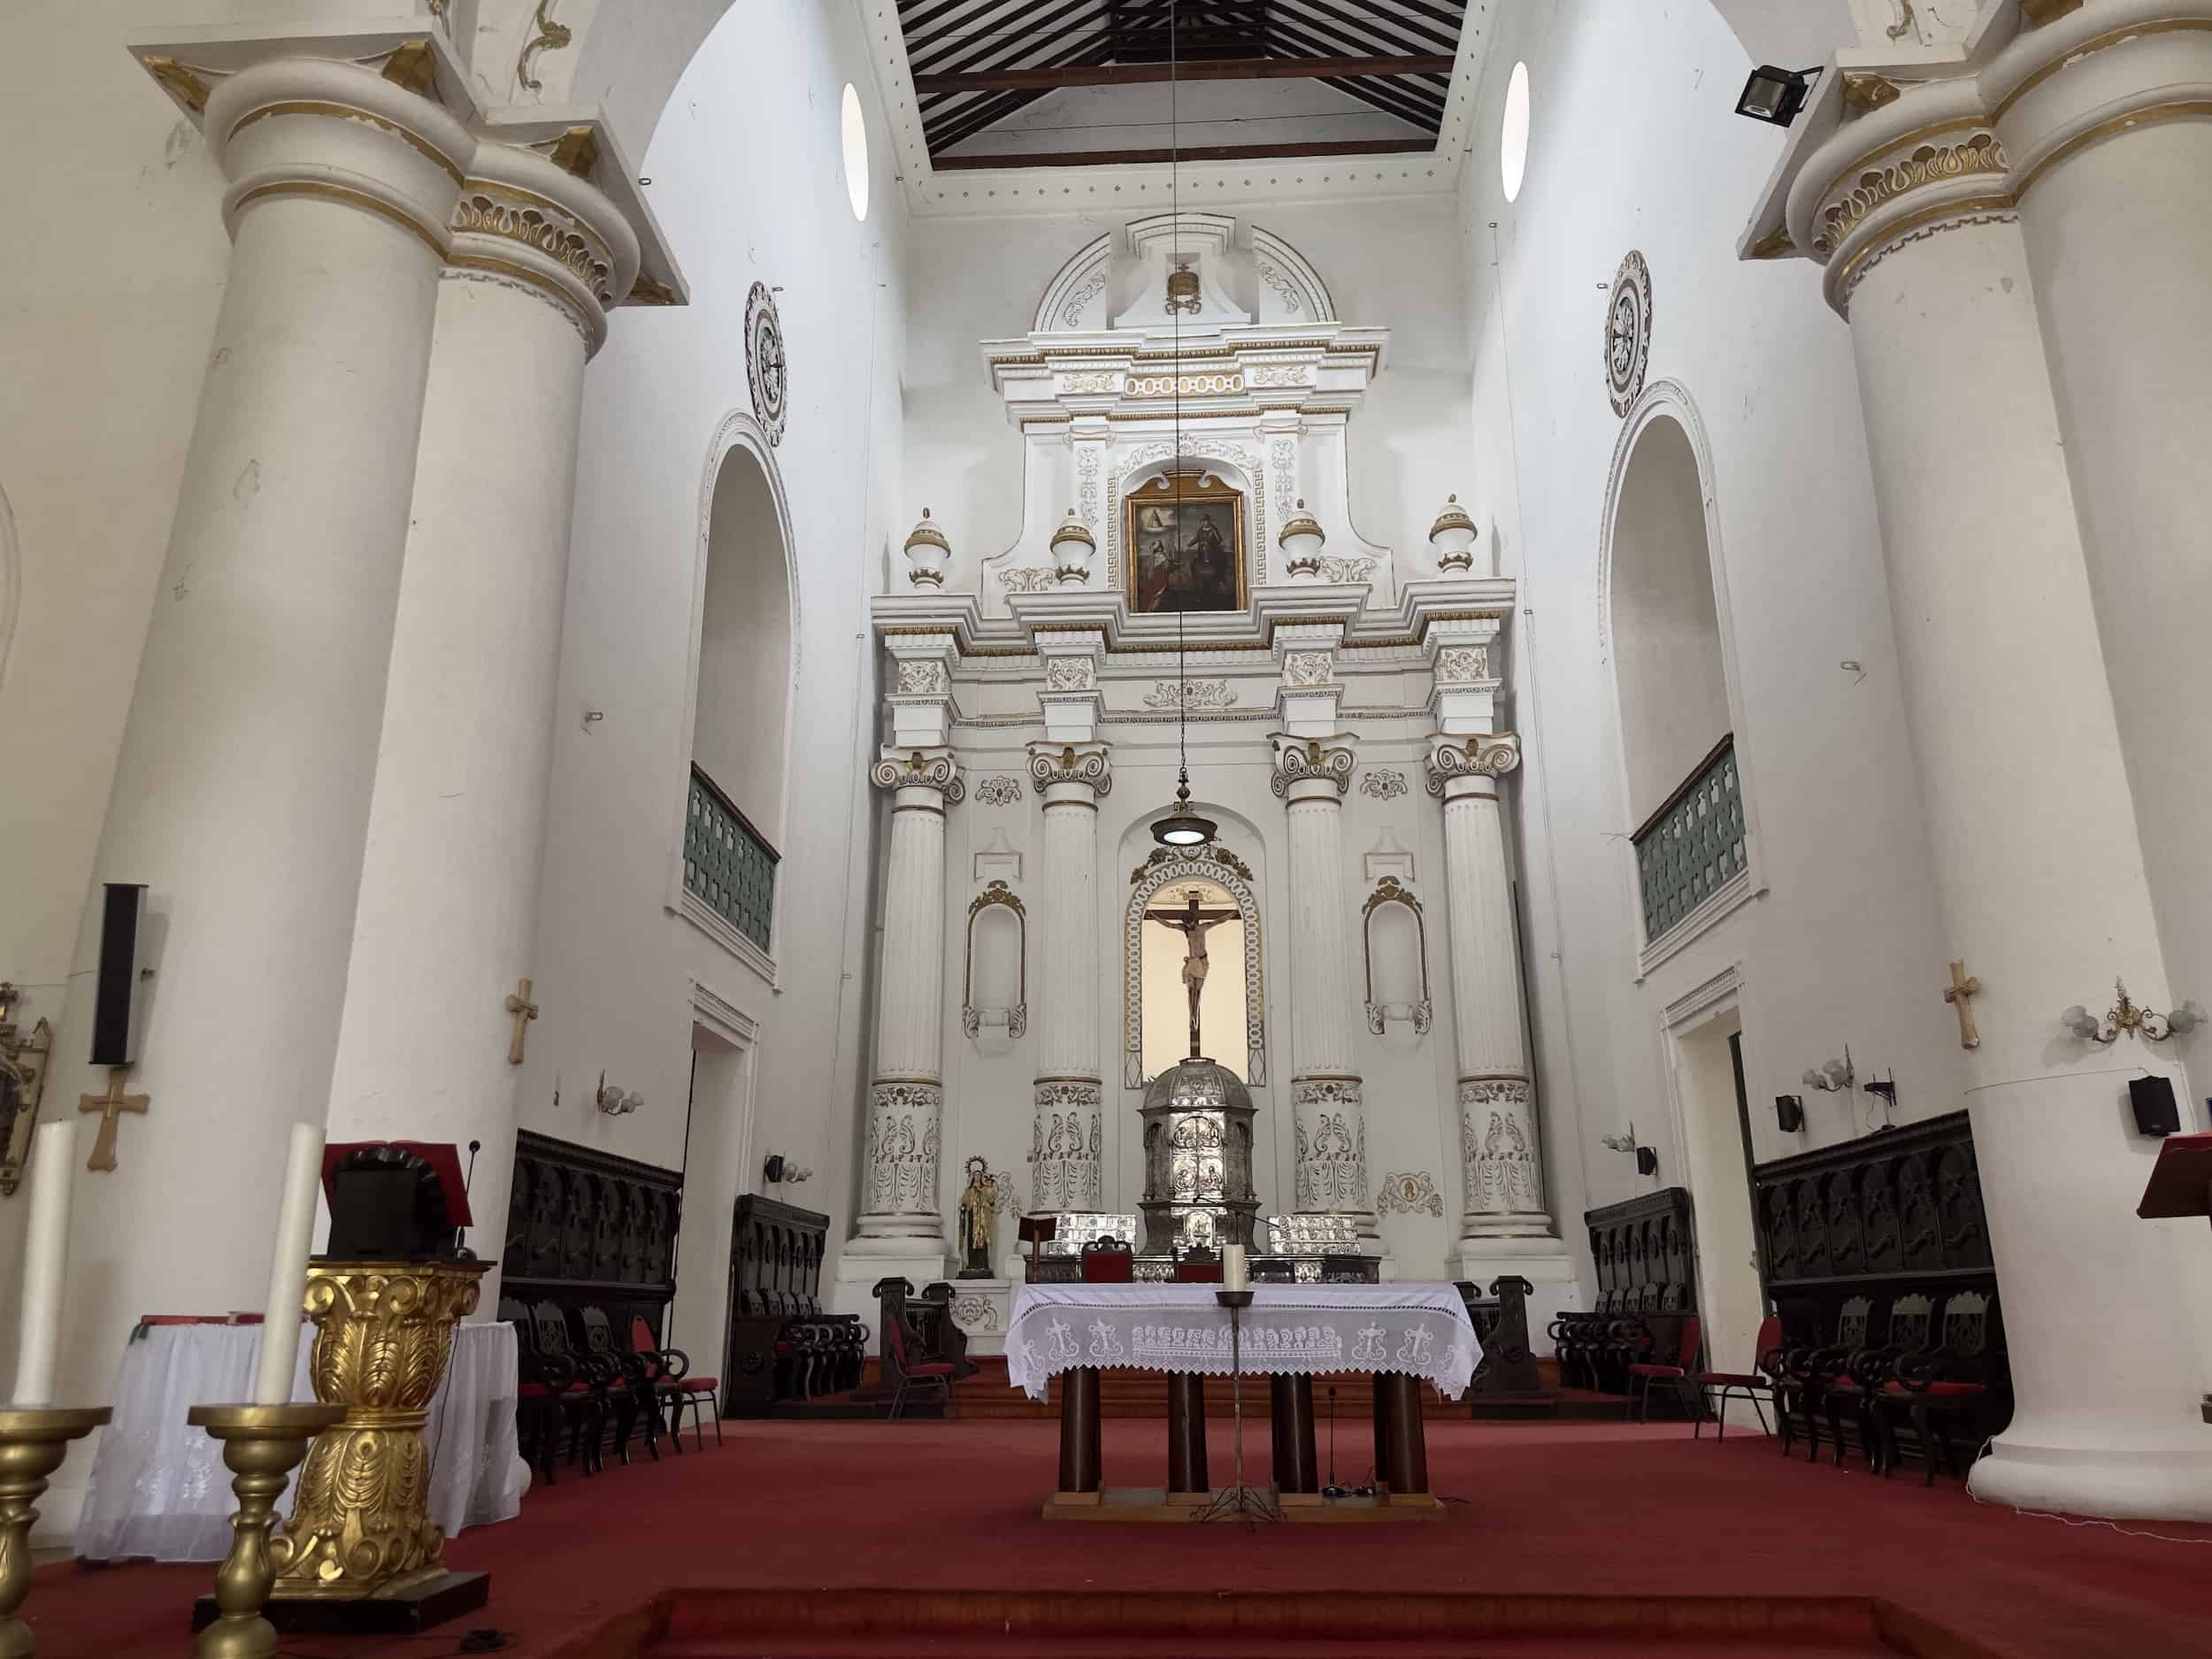 Main altar at the Cathedral of Santa Fe de Antioquia, Colombia